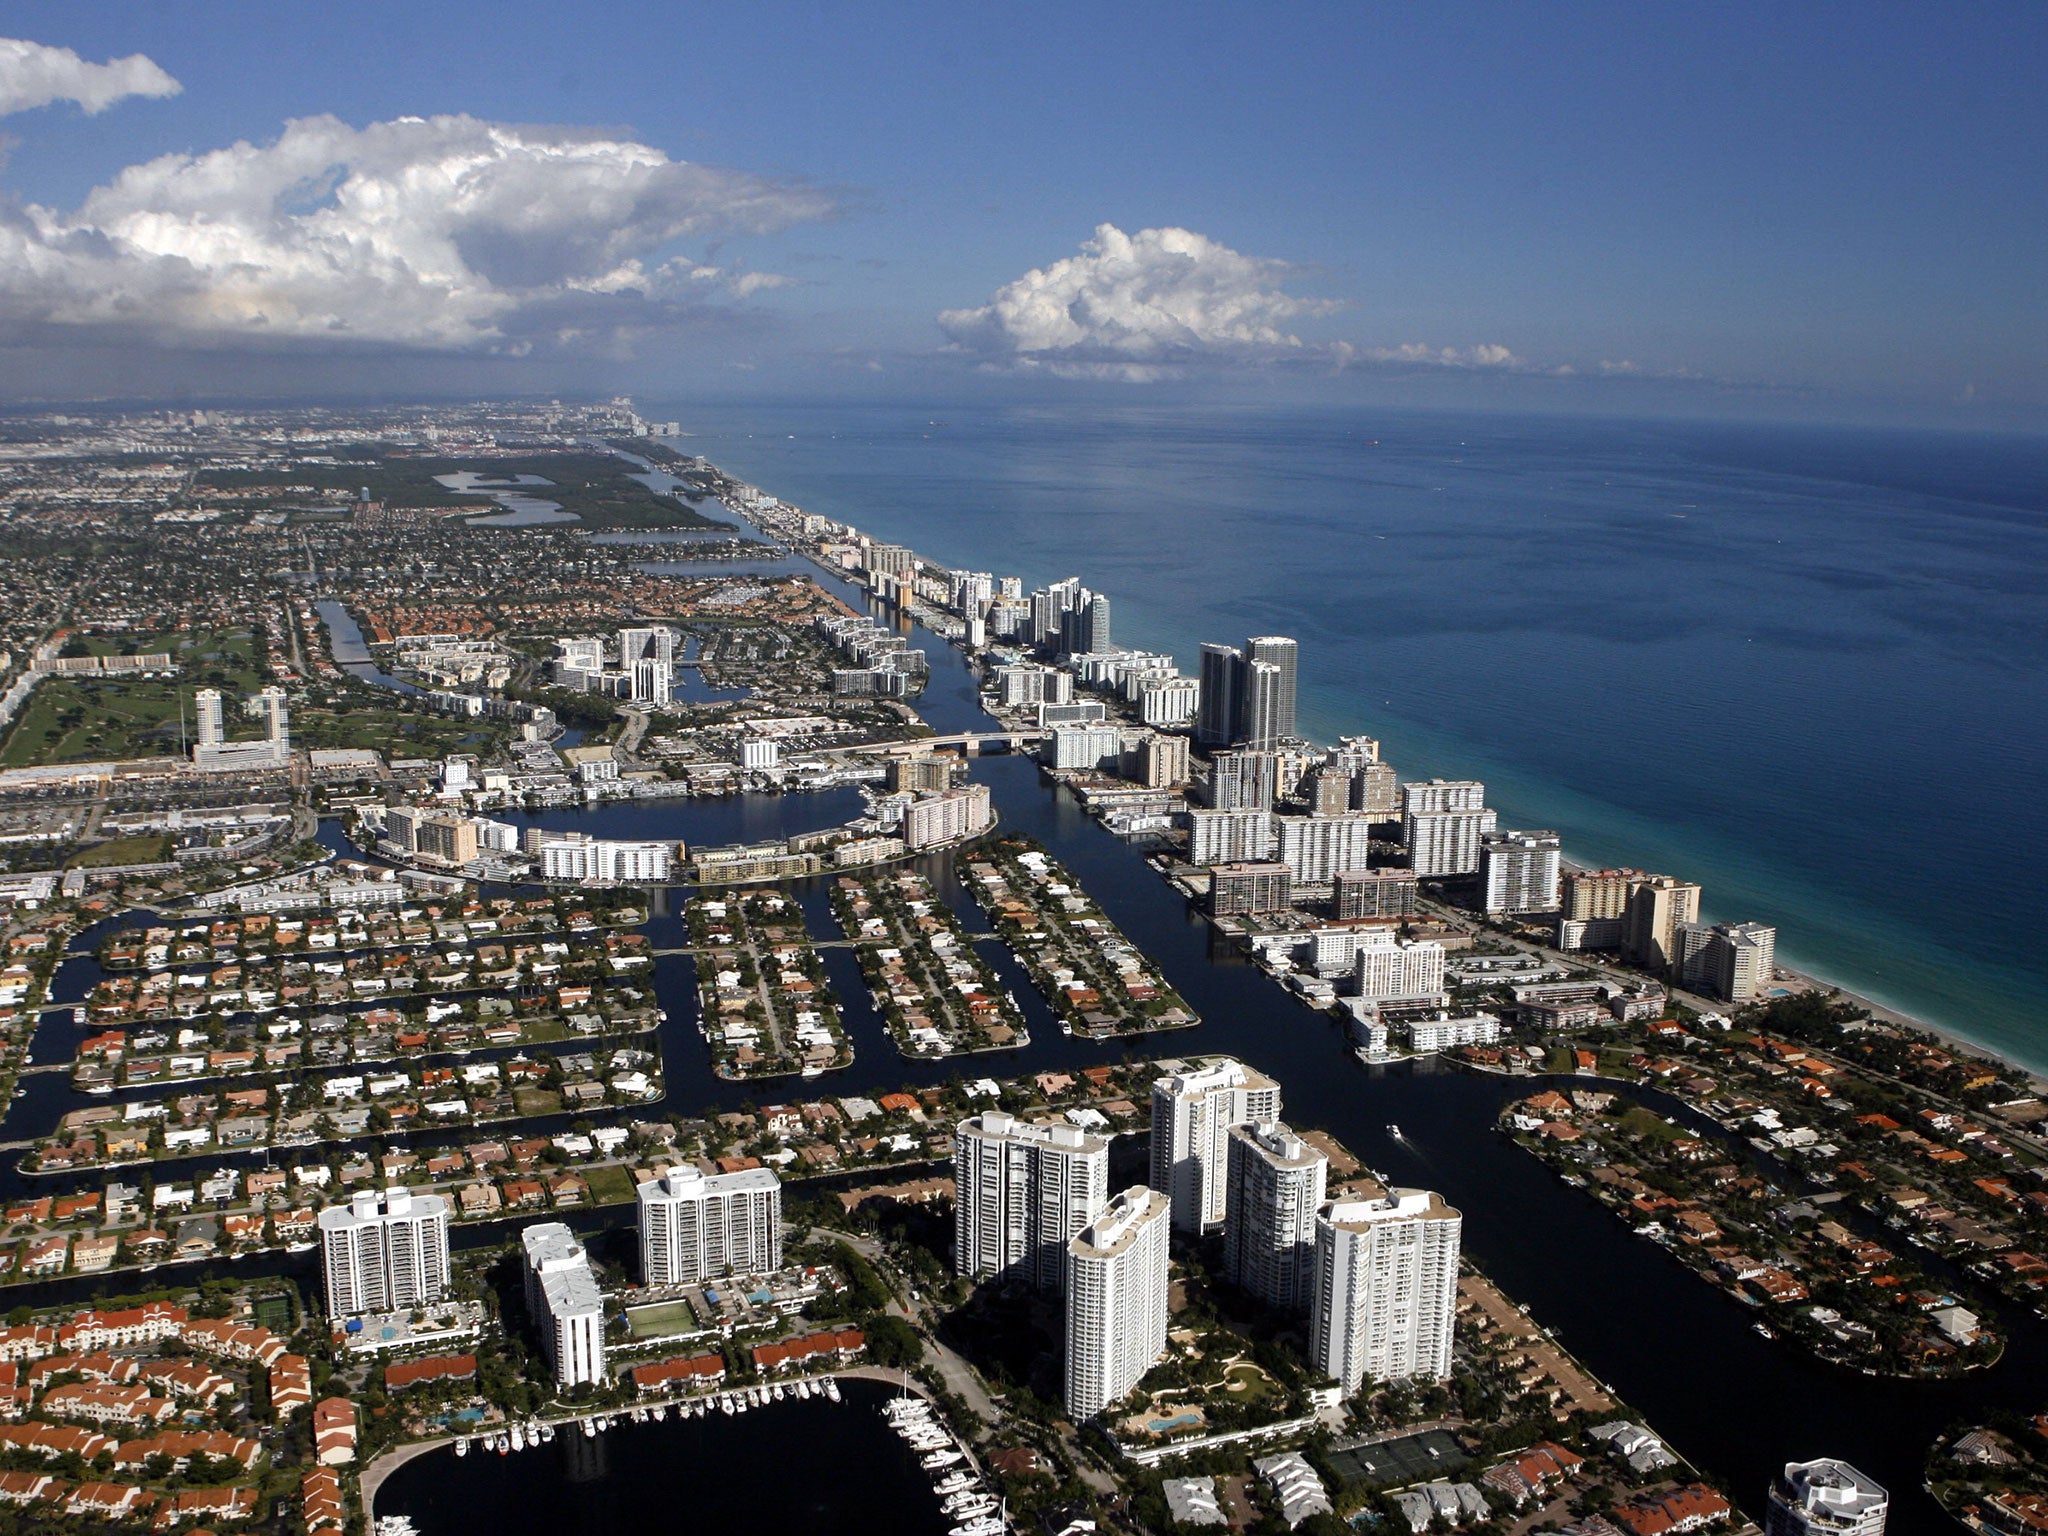 Flood damage in low-lying Miami could be the most costly in the world